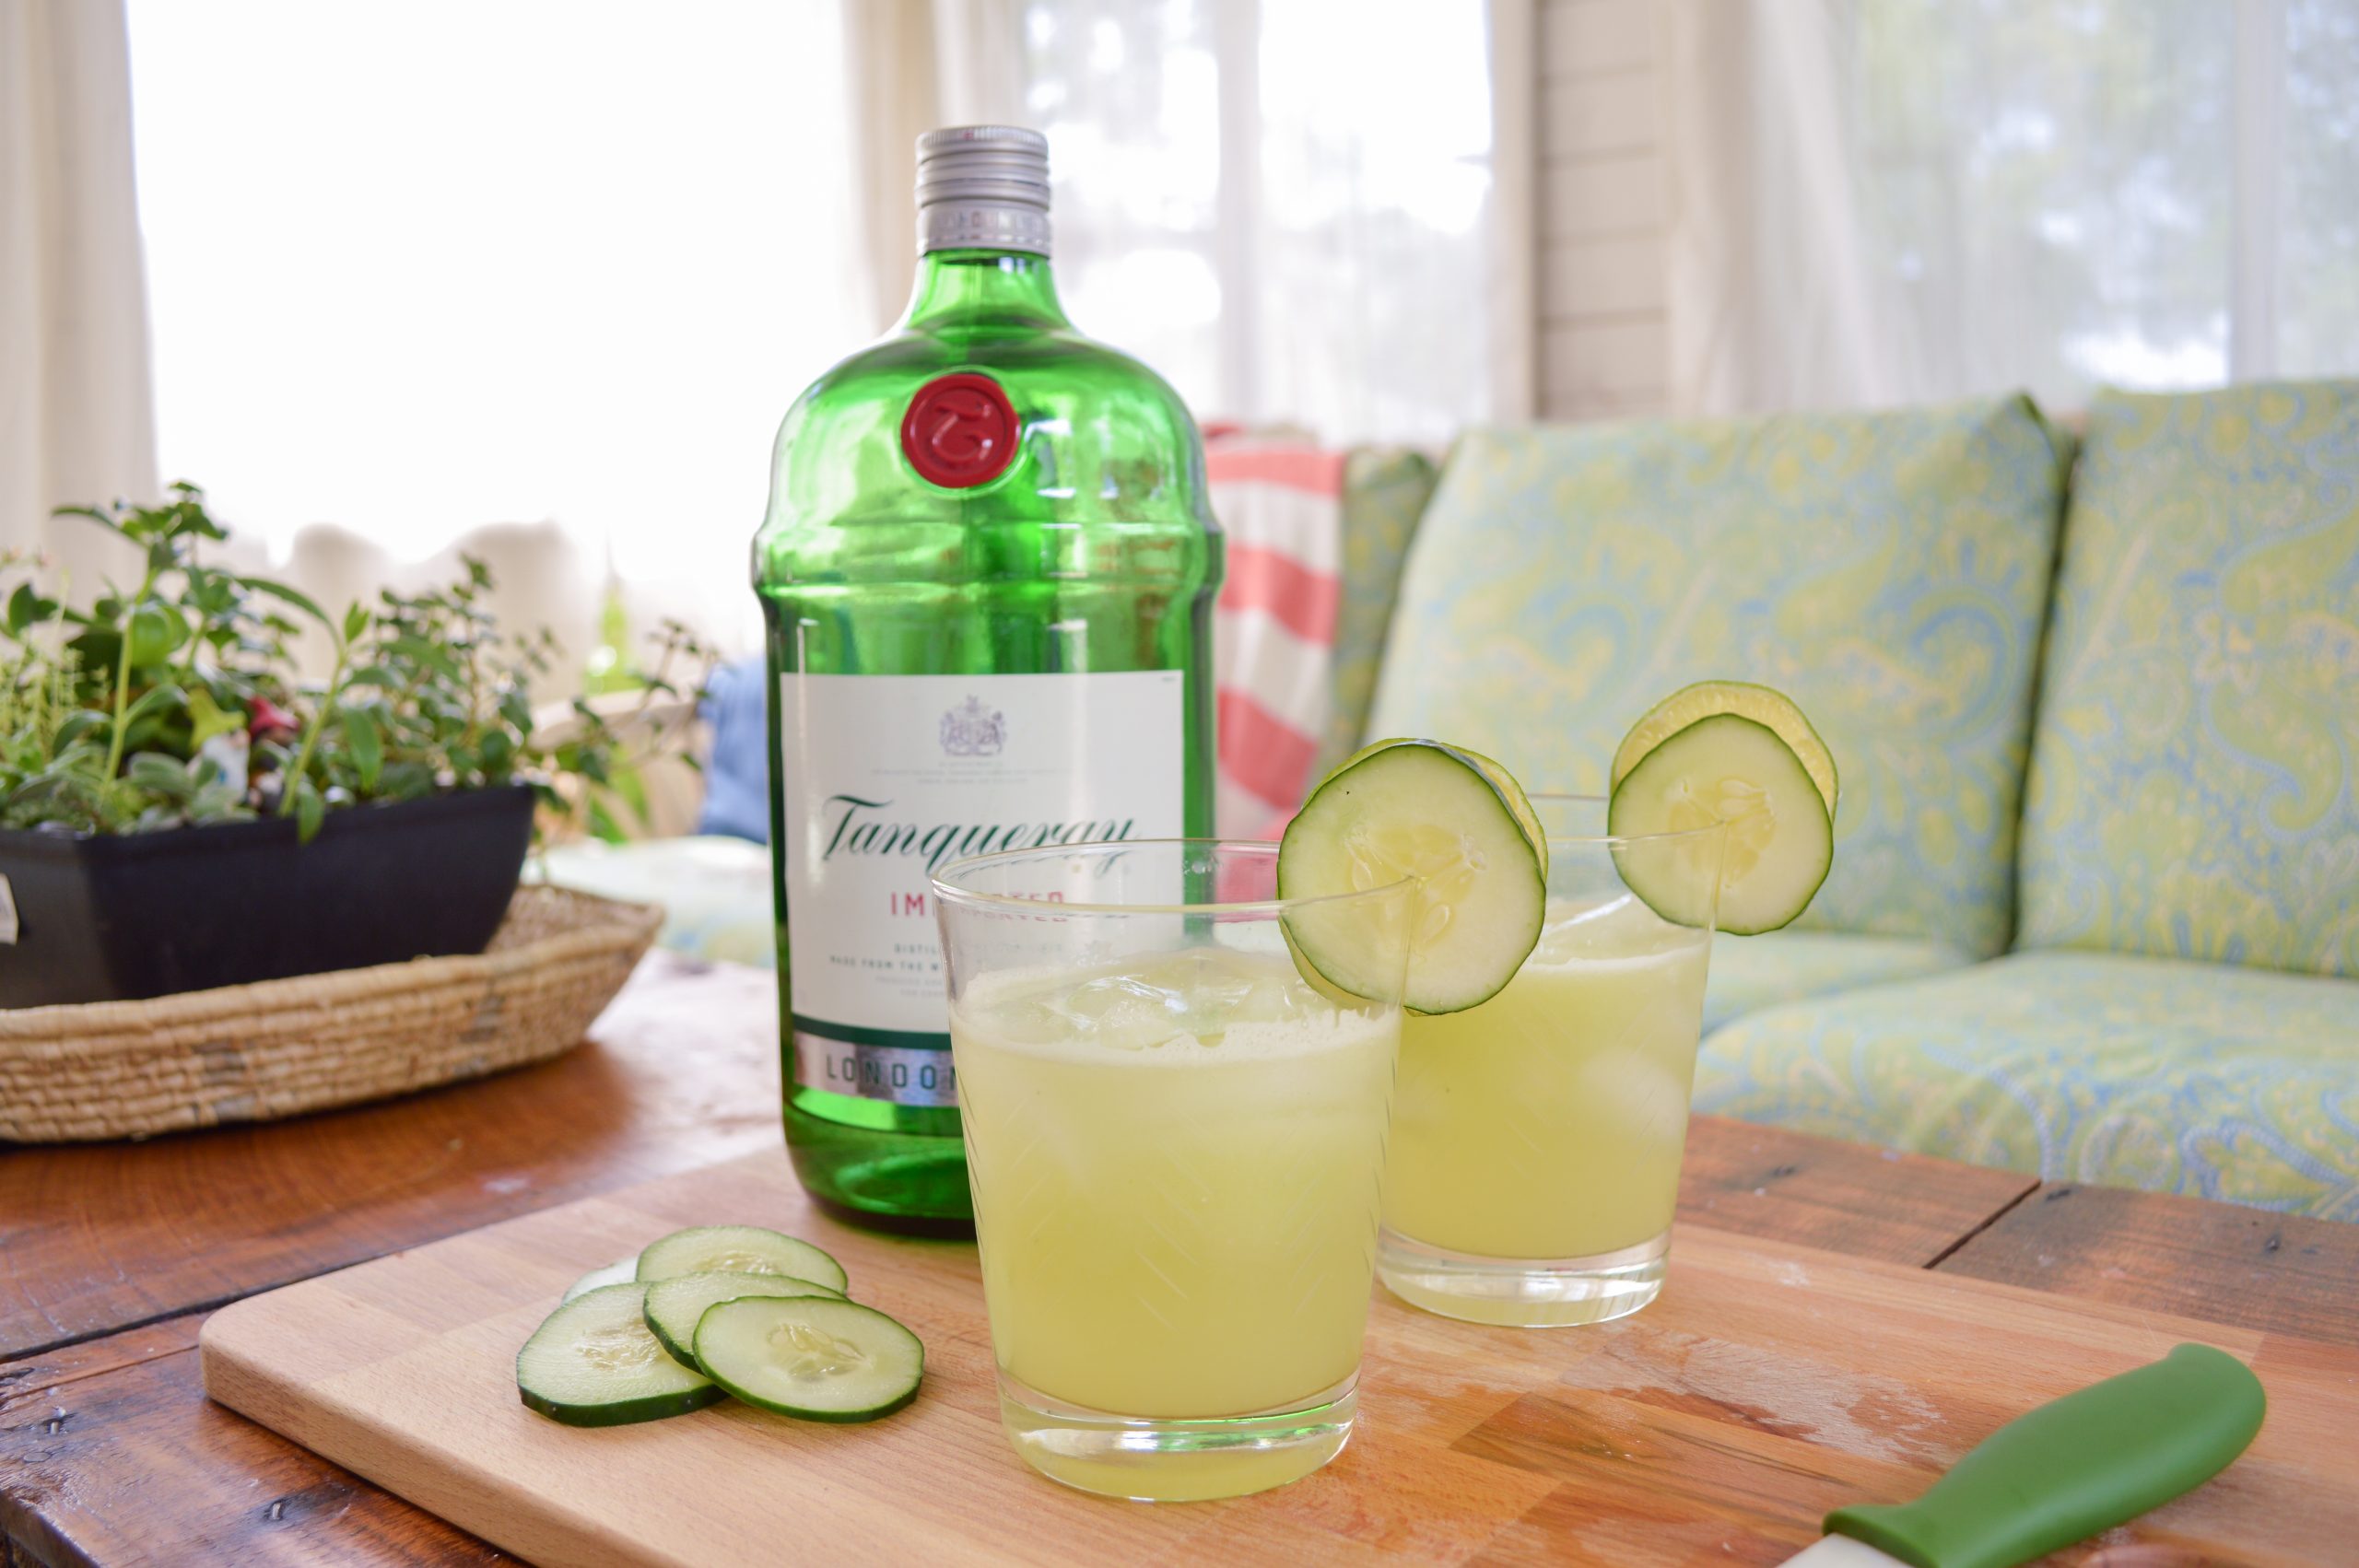 cucumber lime gin and tonic cocktails made with Tanqueray